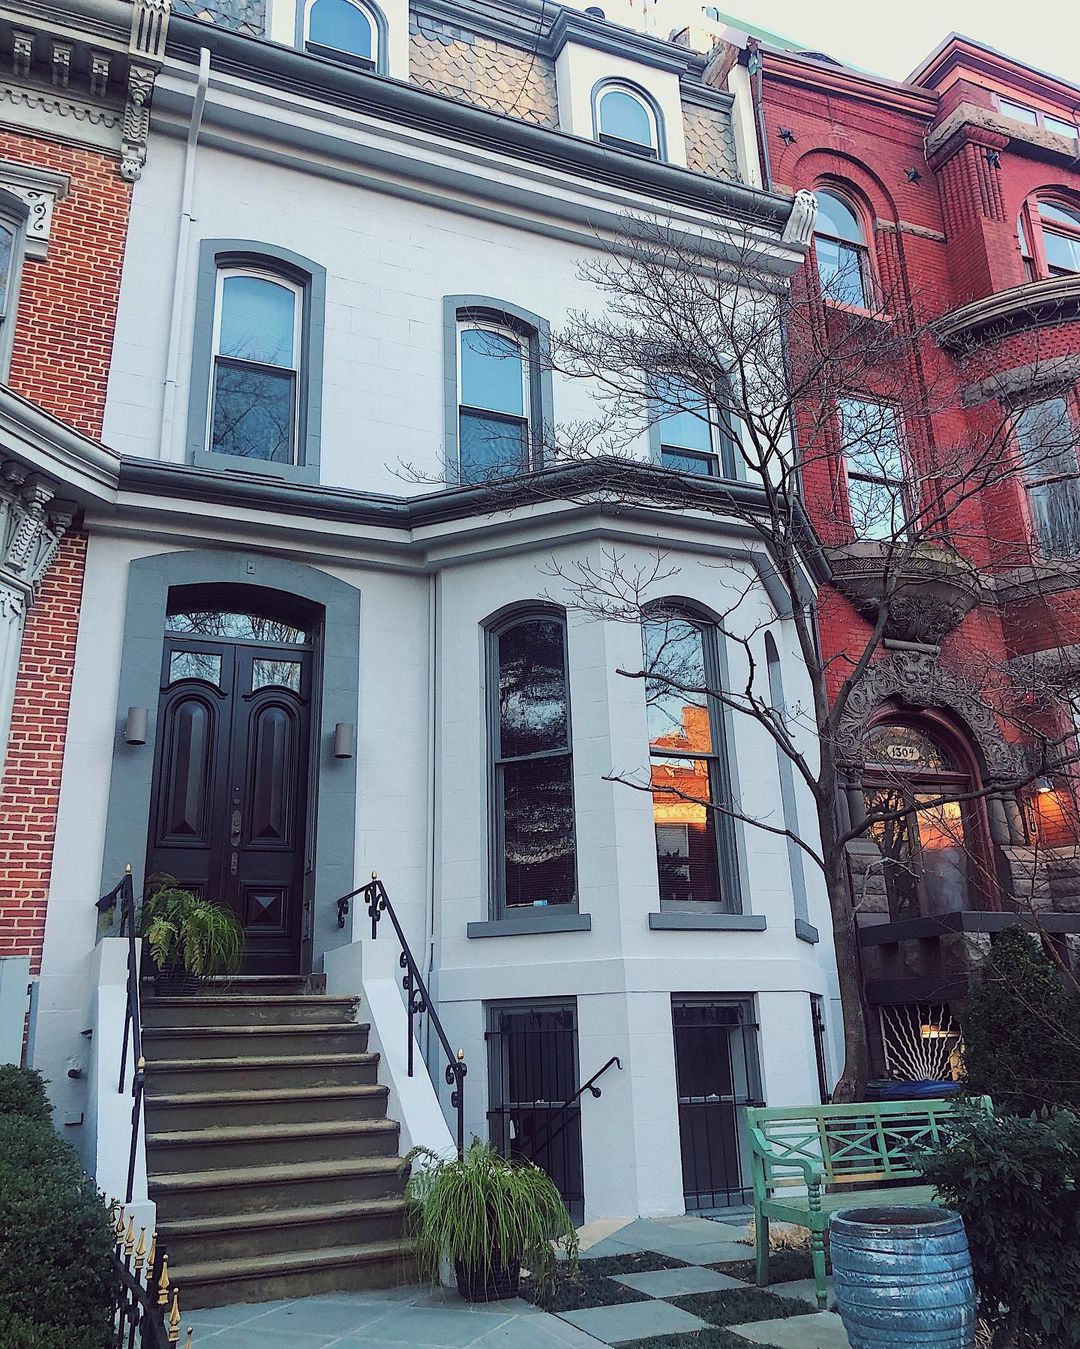 Refreshed vintage rowhome in Washington, DC neighborhood of Logan Circle. Photo by Instagram user @district_casa.